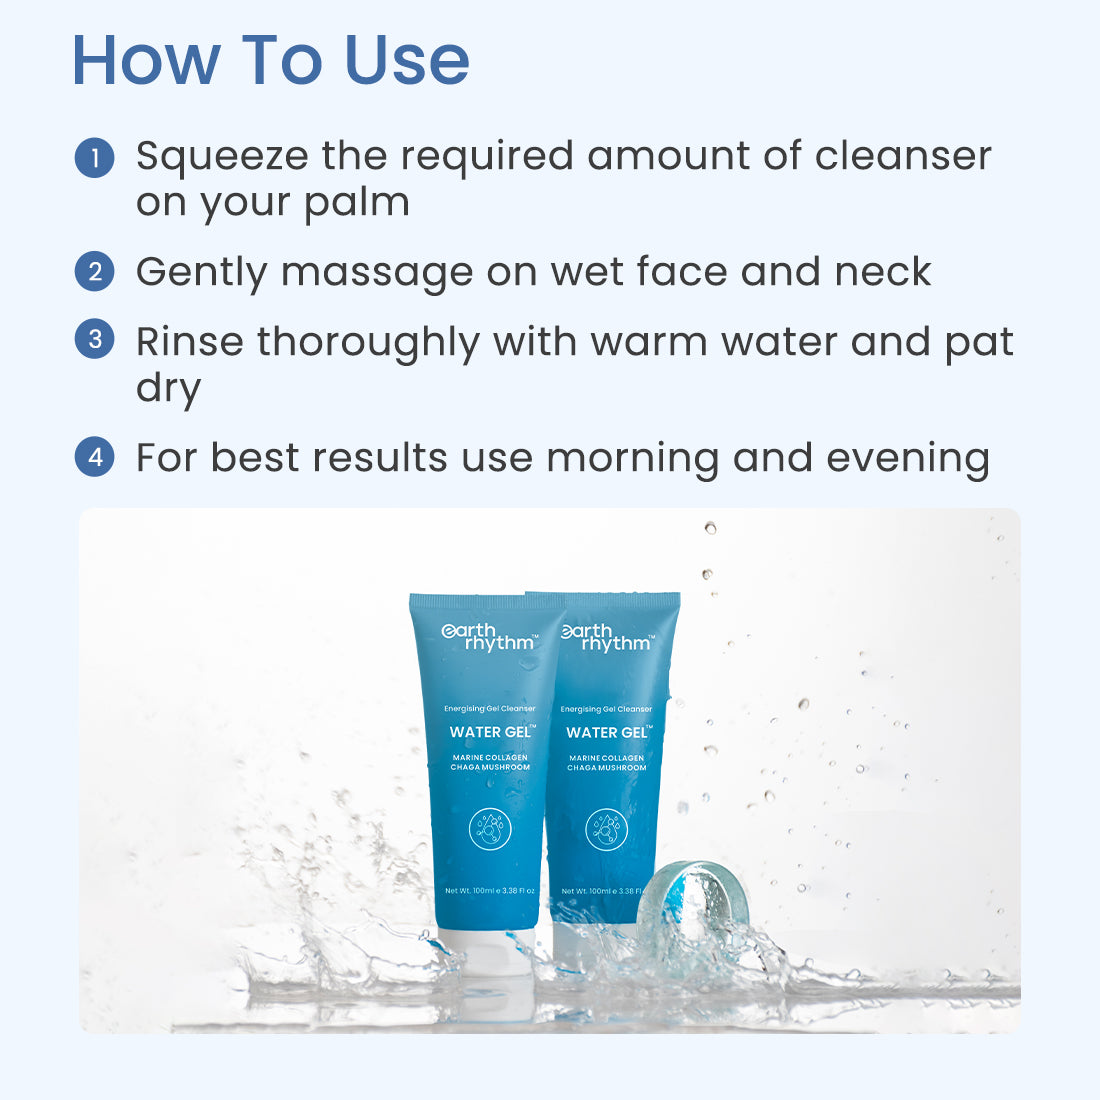 HOW TO USE WATER GEL CLEANSER WITH MARINE COLLAGEN